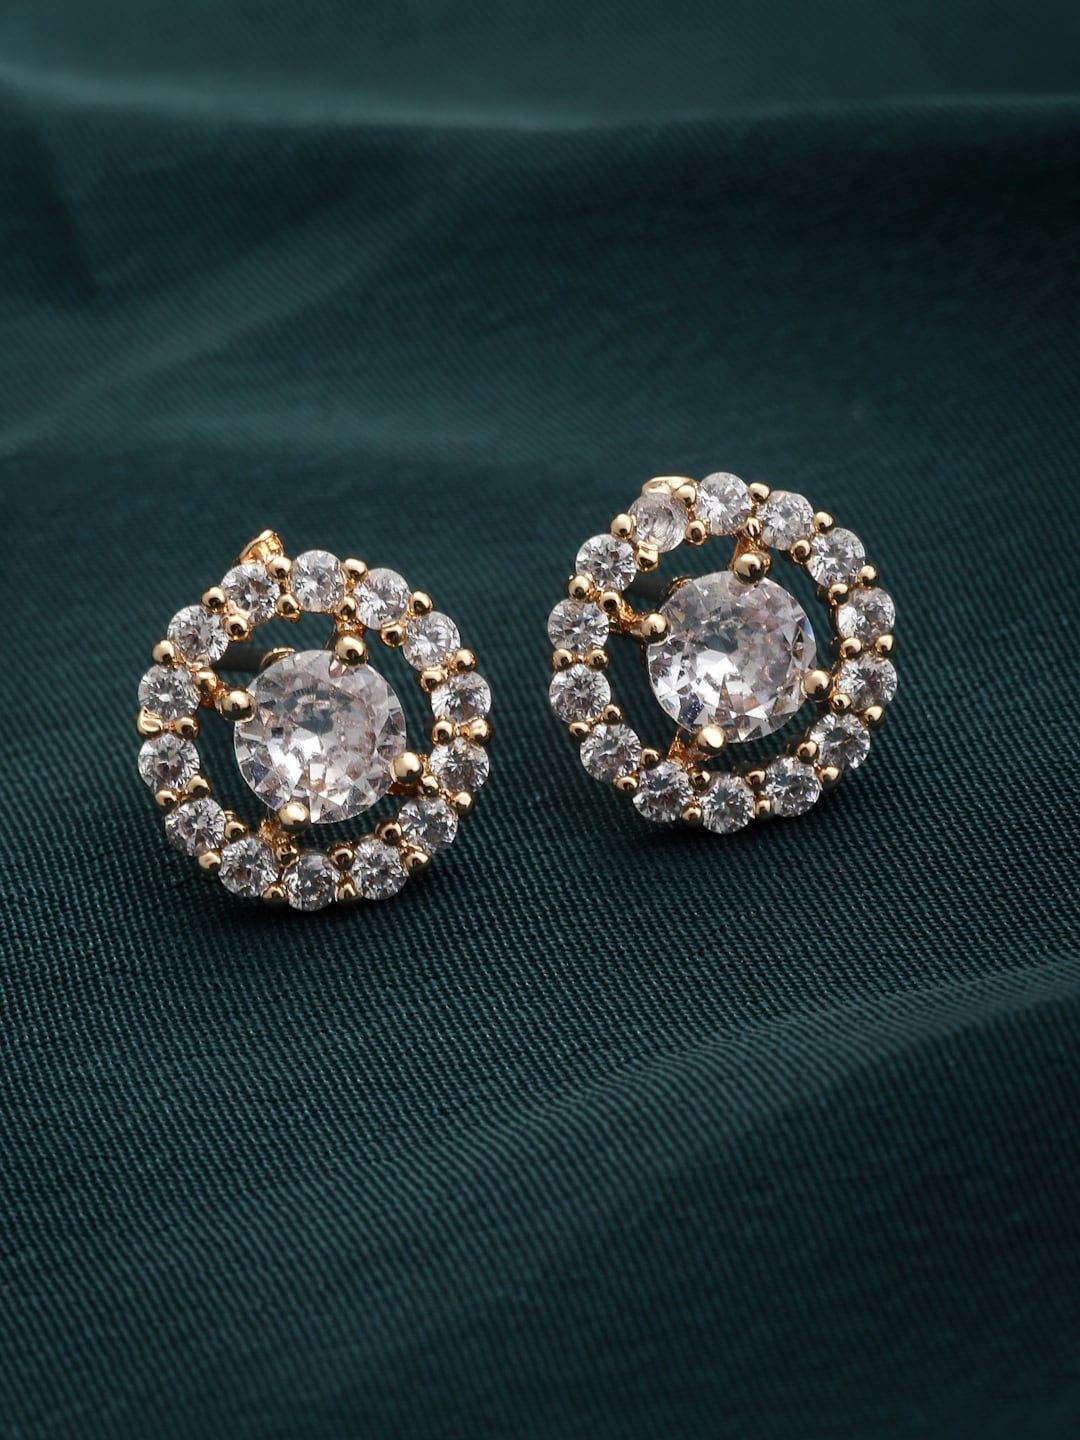 VOGUE PANASH Gold-Toned Circular Studs Earrings Price in India